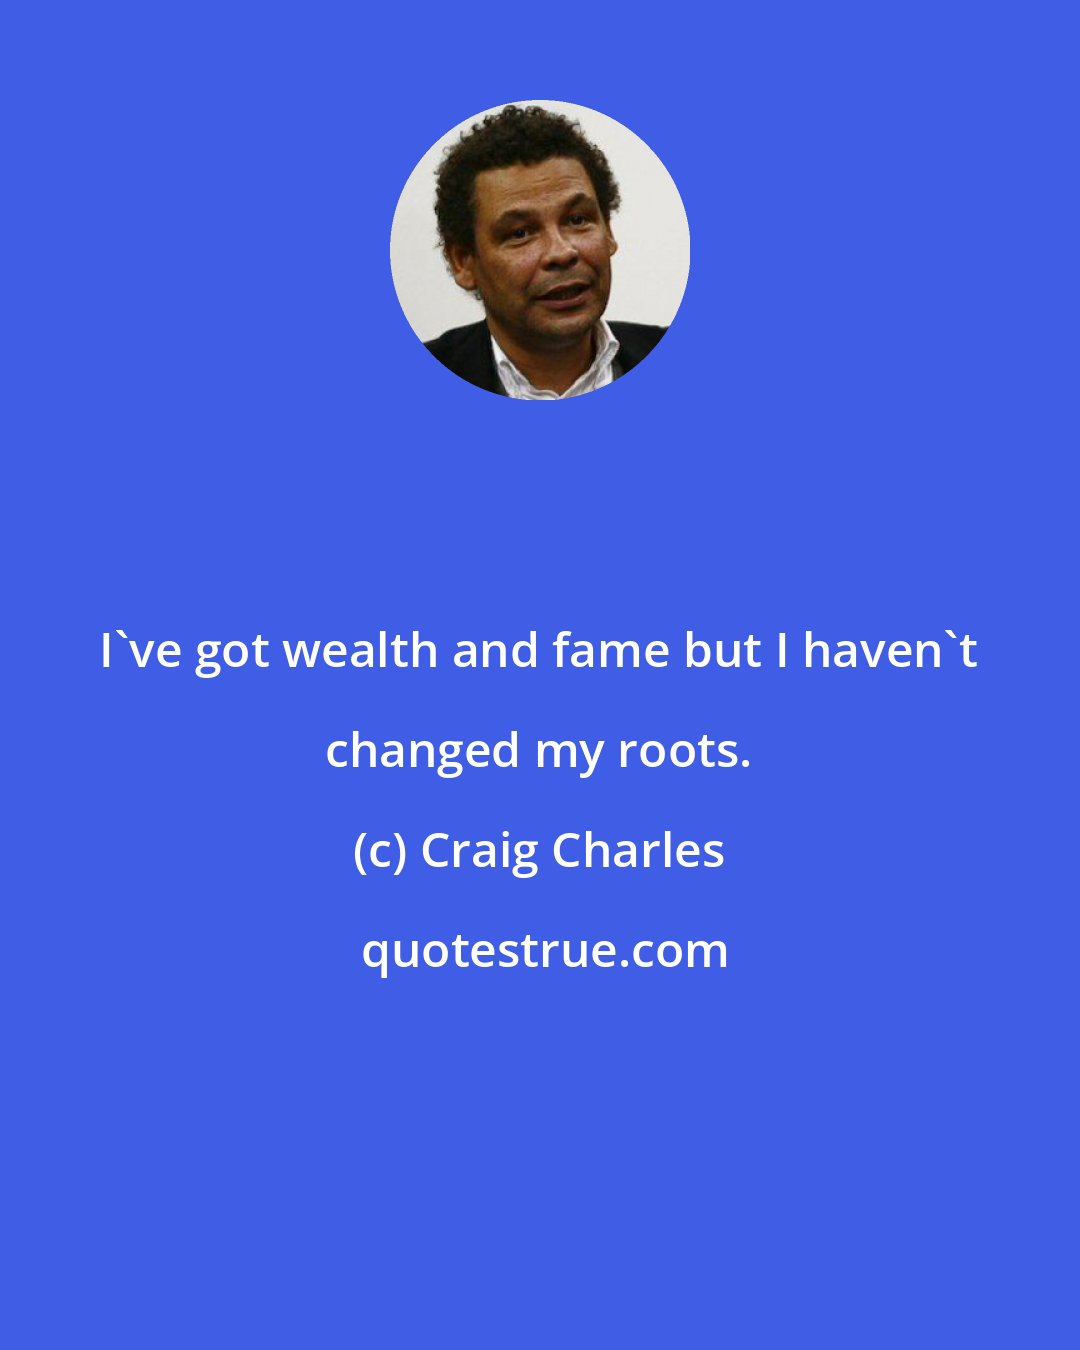 Craig Charles: I've got wealth and fame but I haven't changed my roots.